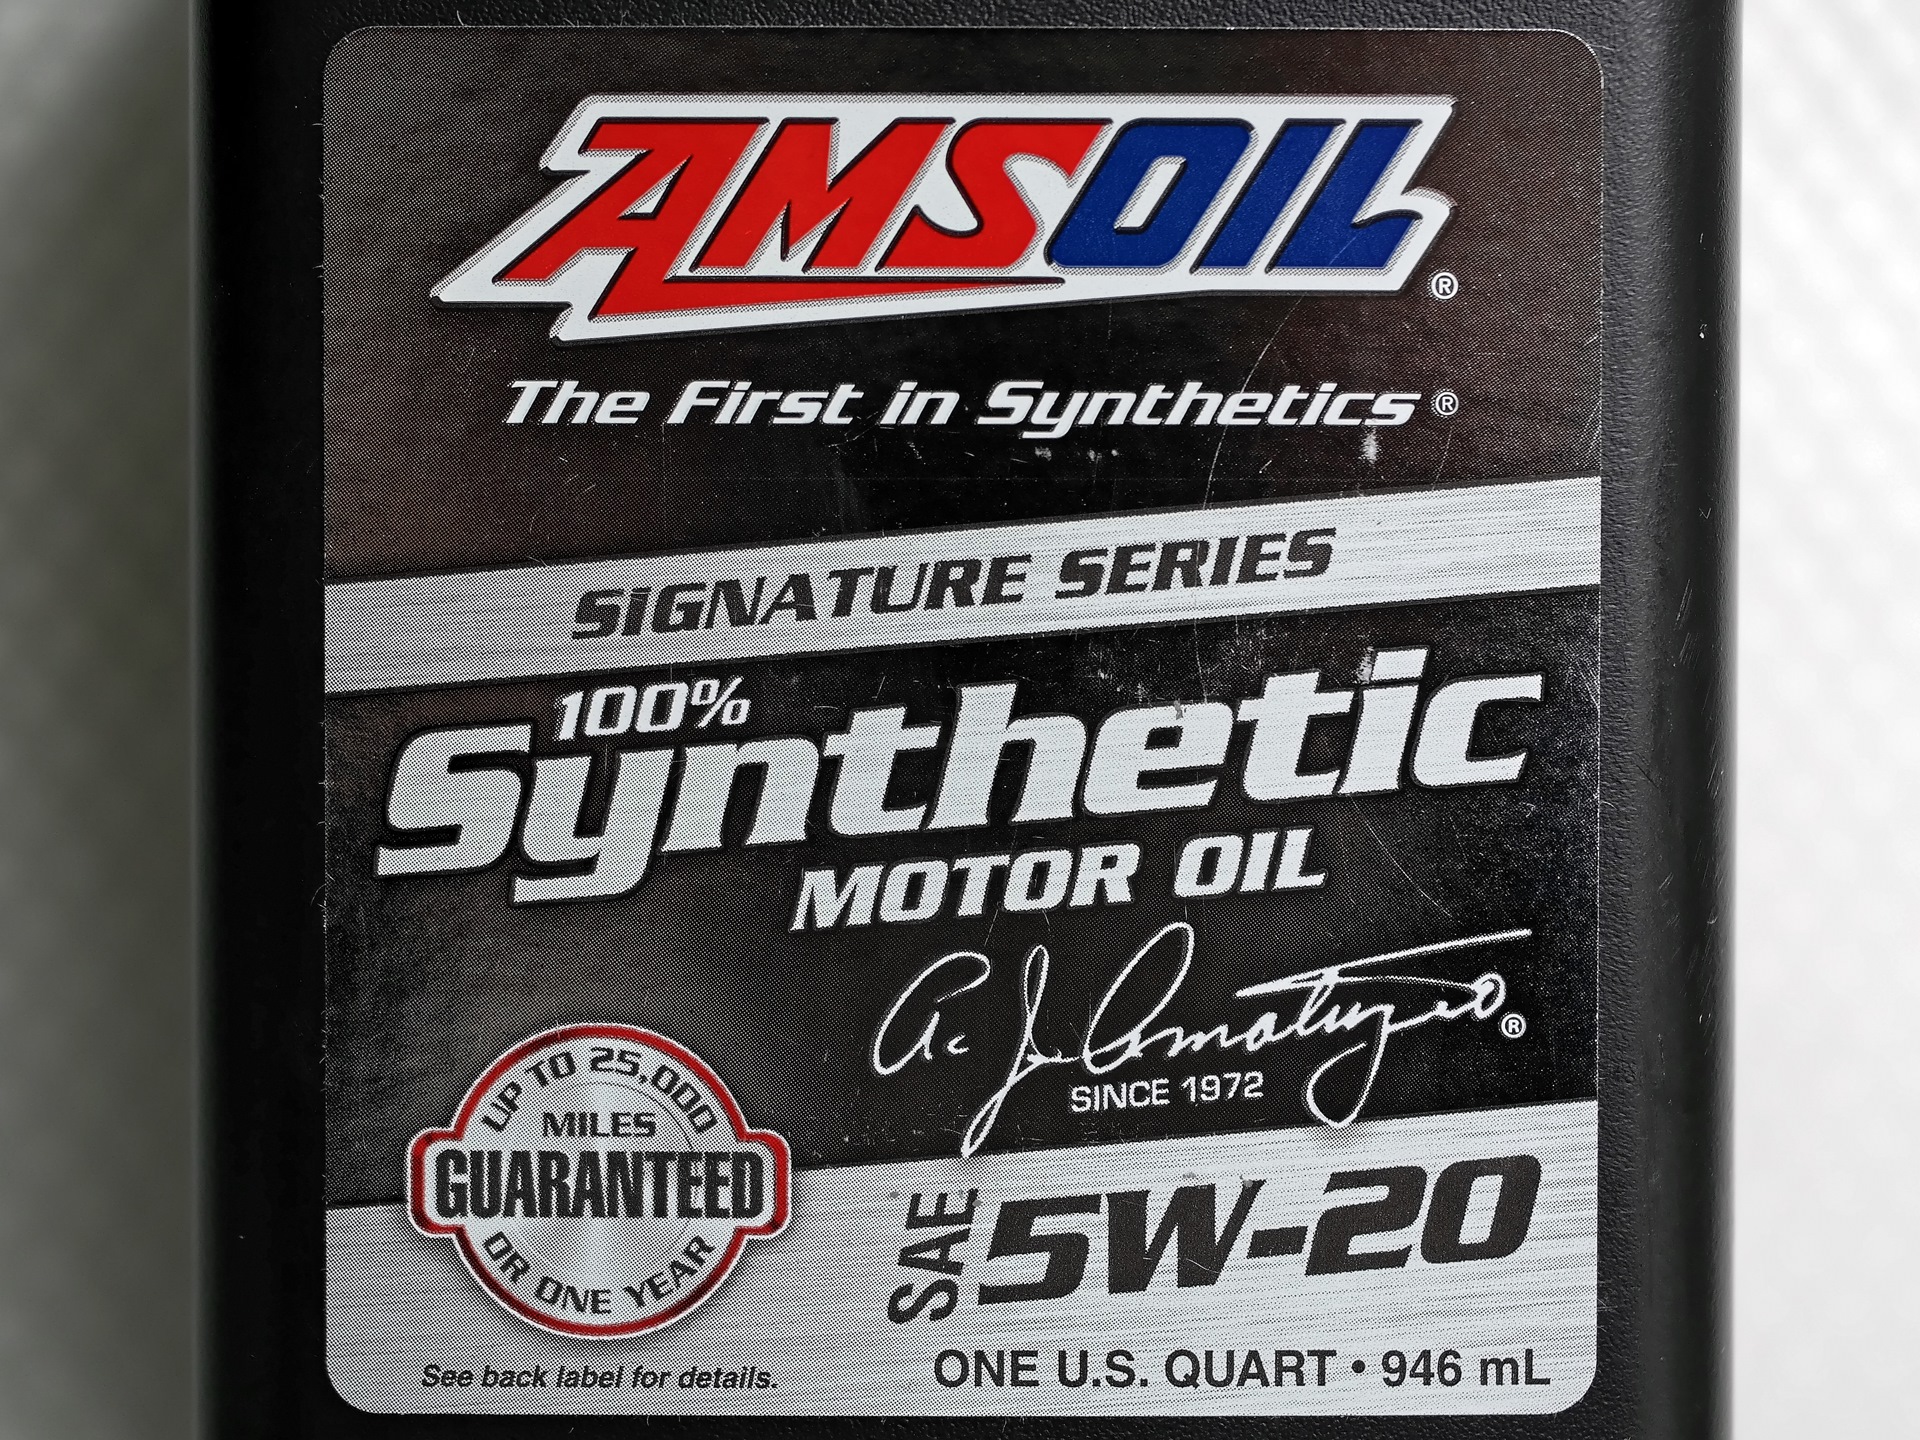 Signature series synthetic. AMSOIL 5w20. AMSOIL 5w20 артикул. Аmsoil Signature Series 100% Synthetic 5w-30. AMSOIL Signature Series Synthetic Motor Oil 5w-30.